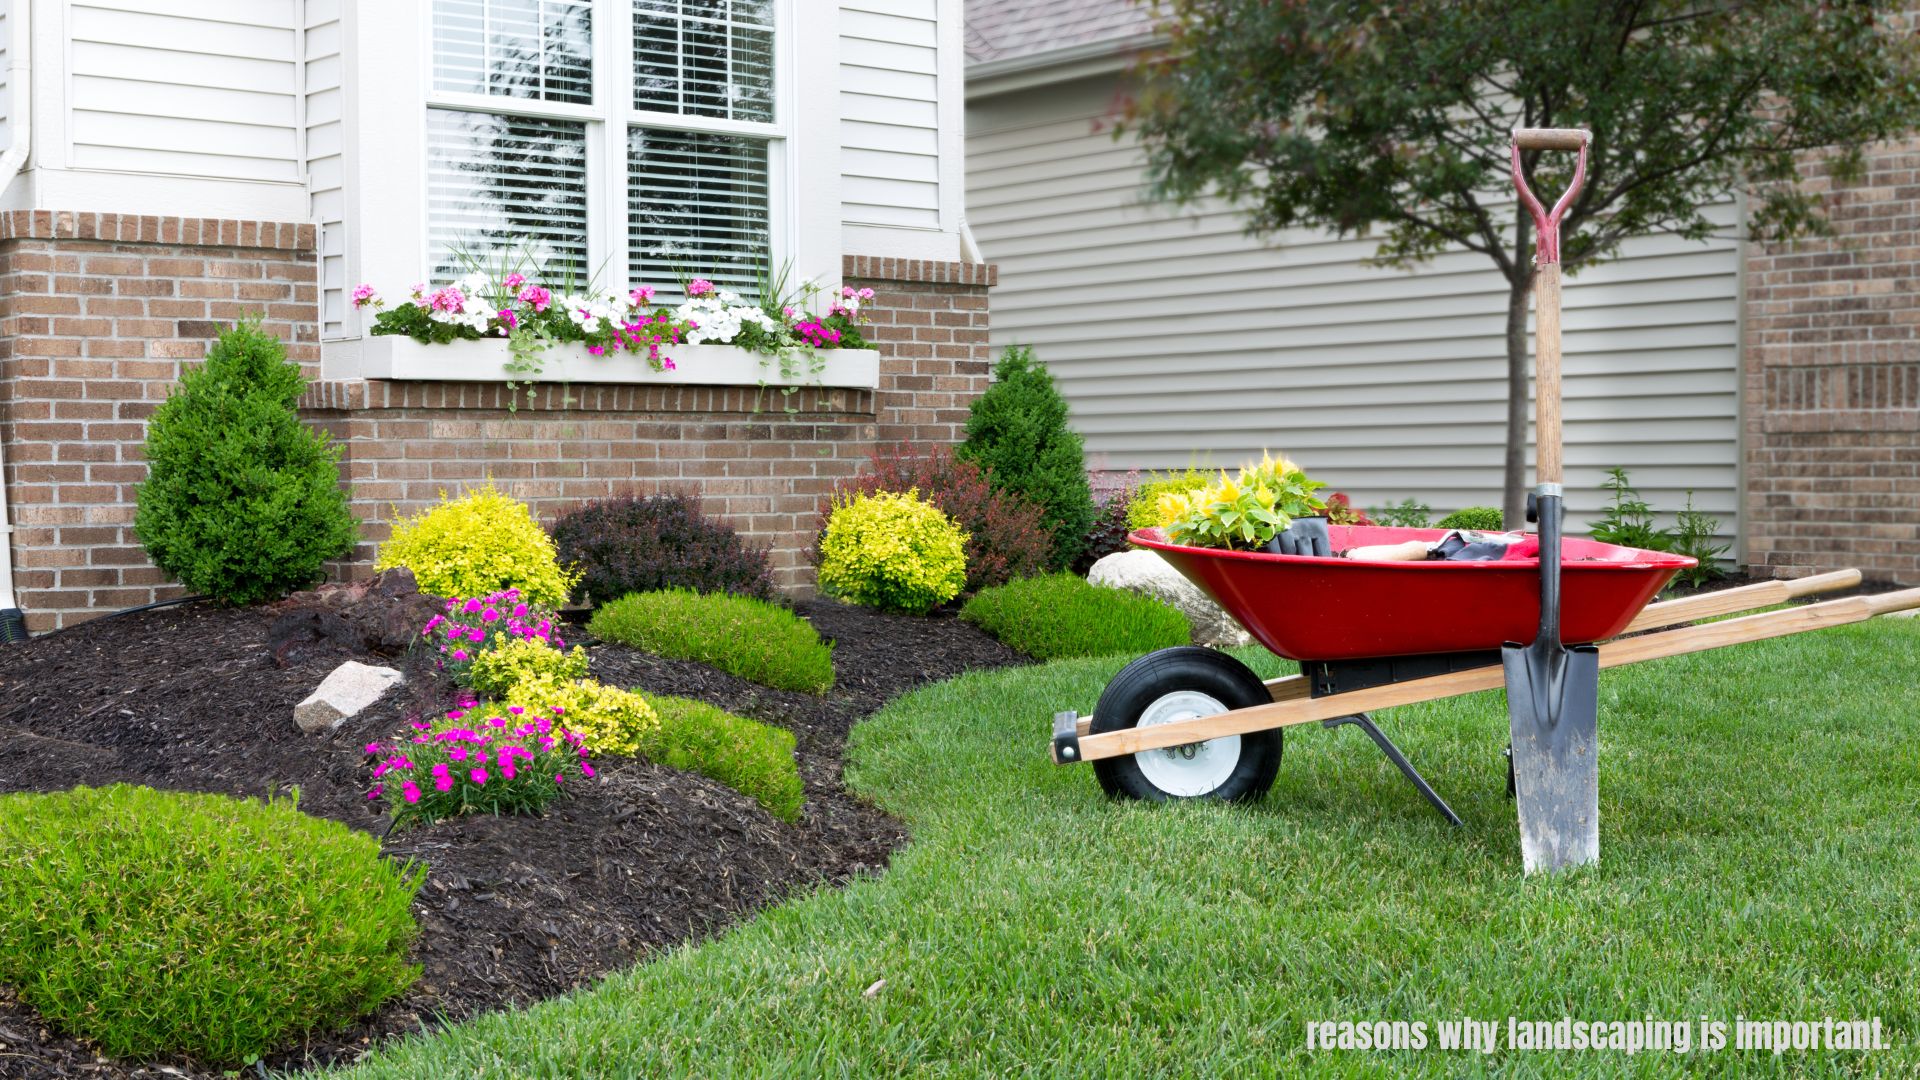 Enhancing curb appeal through landscaping